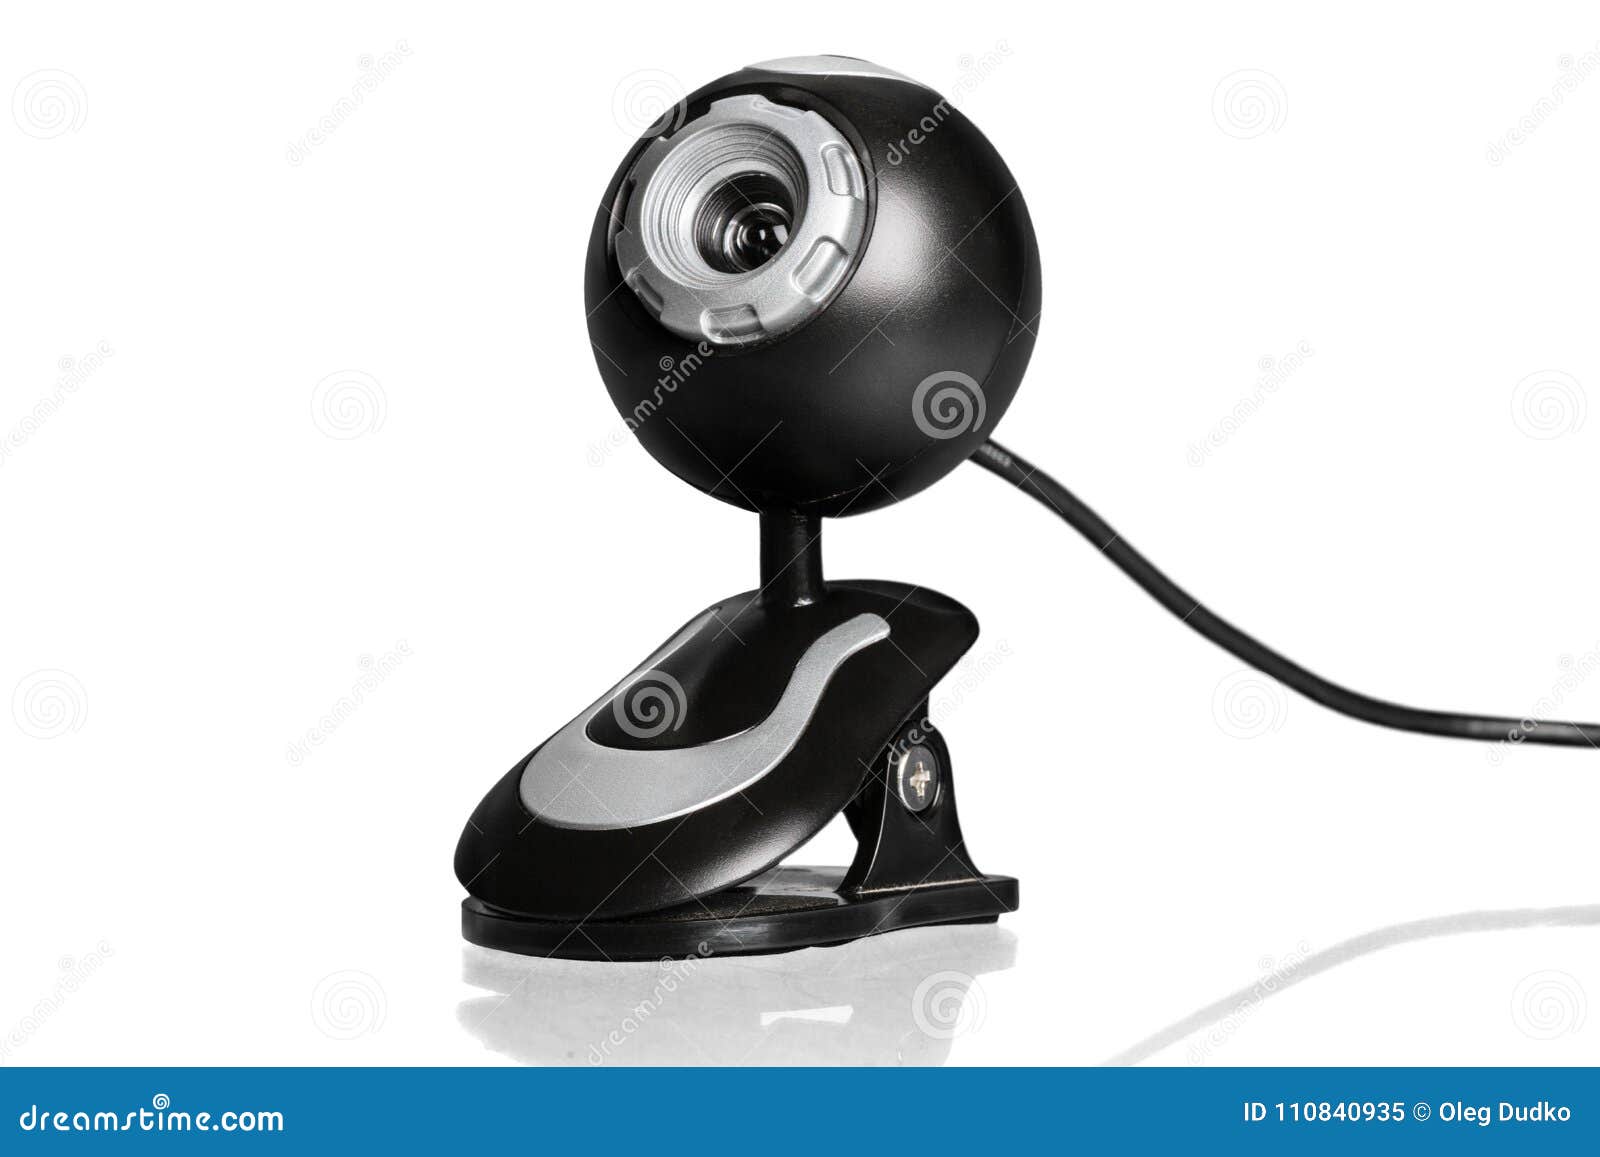 Video camera download chat Free Video